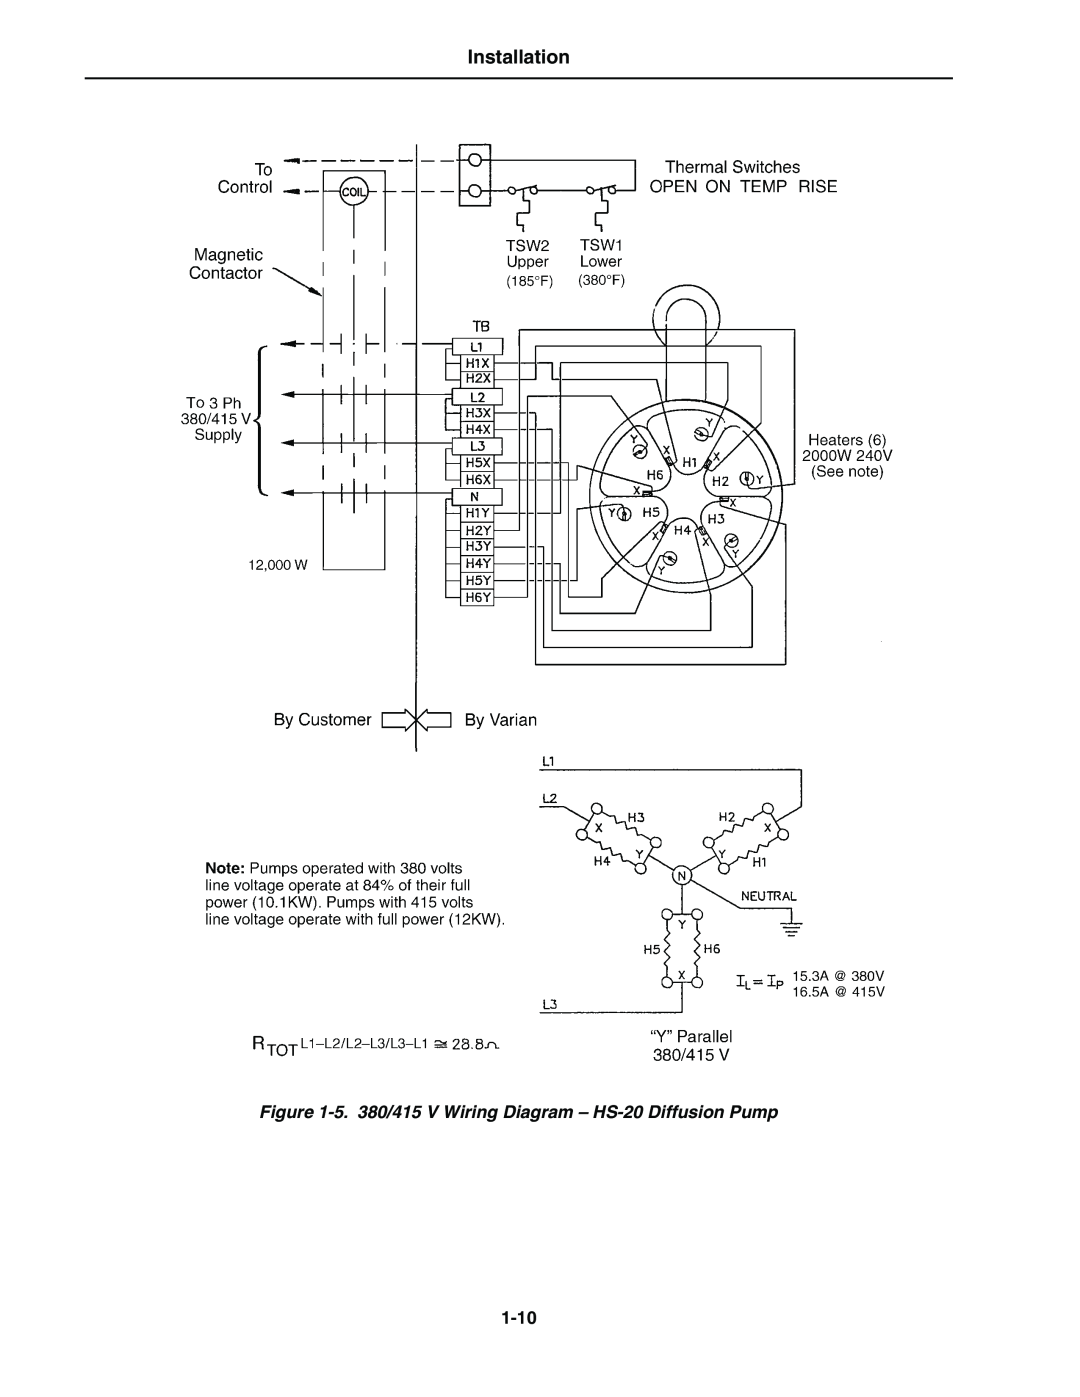 Bissell instruction manual Installation, 5. 380/415 V Wiring Diagram - HS-20 Diffusion Pump, 1-10 